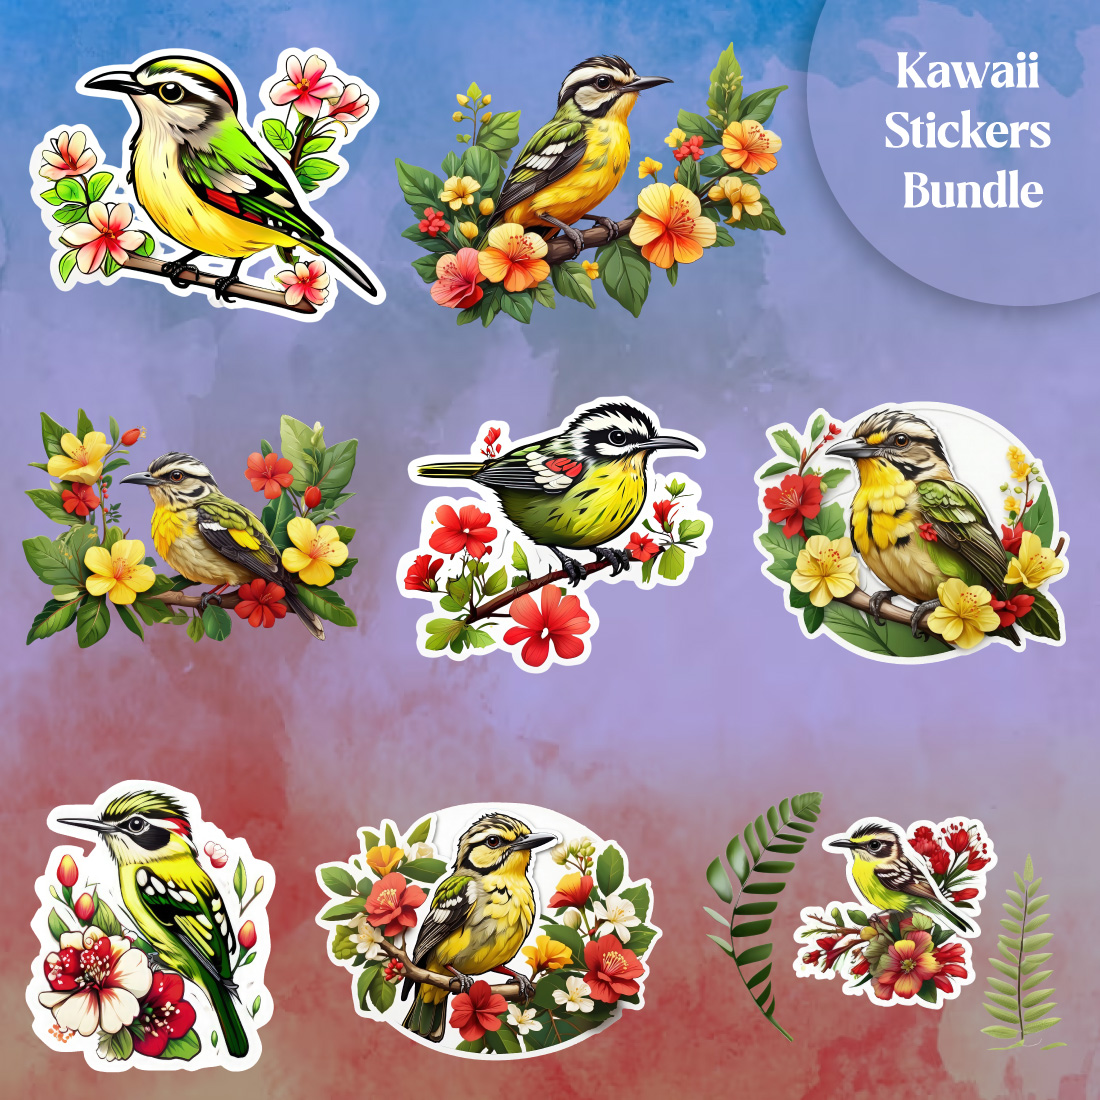 Kawaii Stickers bundle of Tinkerbirds with flowers and leaves for only 4$ preview image.